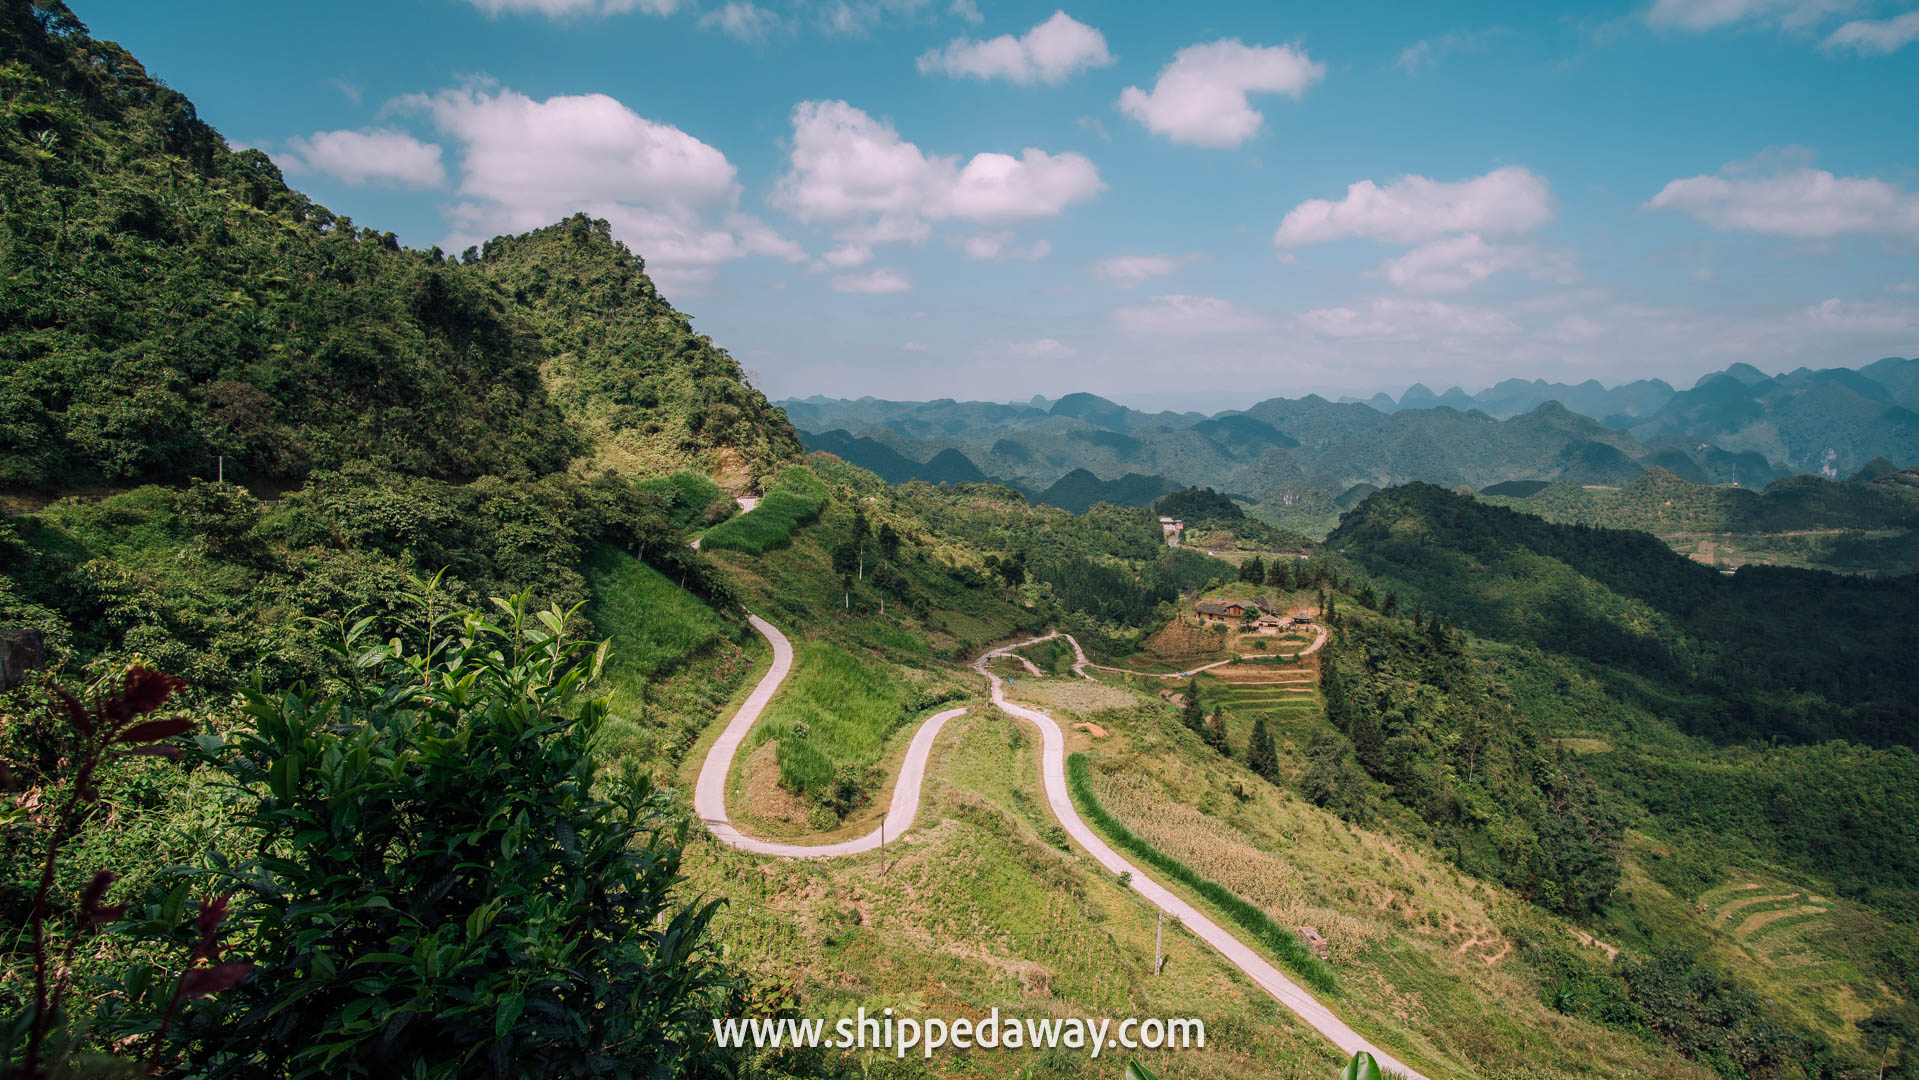 driving ha giang loop independently, ha giang loop road, ha giang loop, ha giang tour, ha giang loop vietnam, ha giang motorbike loop, ha giang loop itinerary, ha giang loop vietnam route, ha giang loop safety - is ha giang loop dangerous, ha giang loop from hanoi, heavens gate